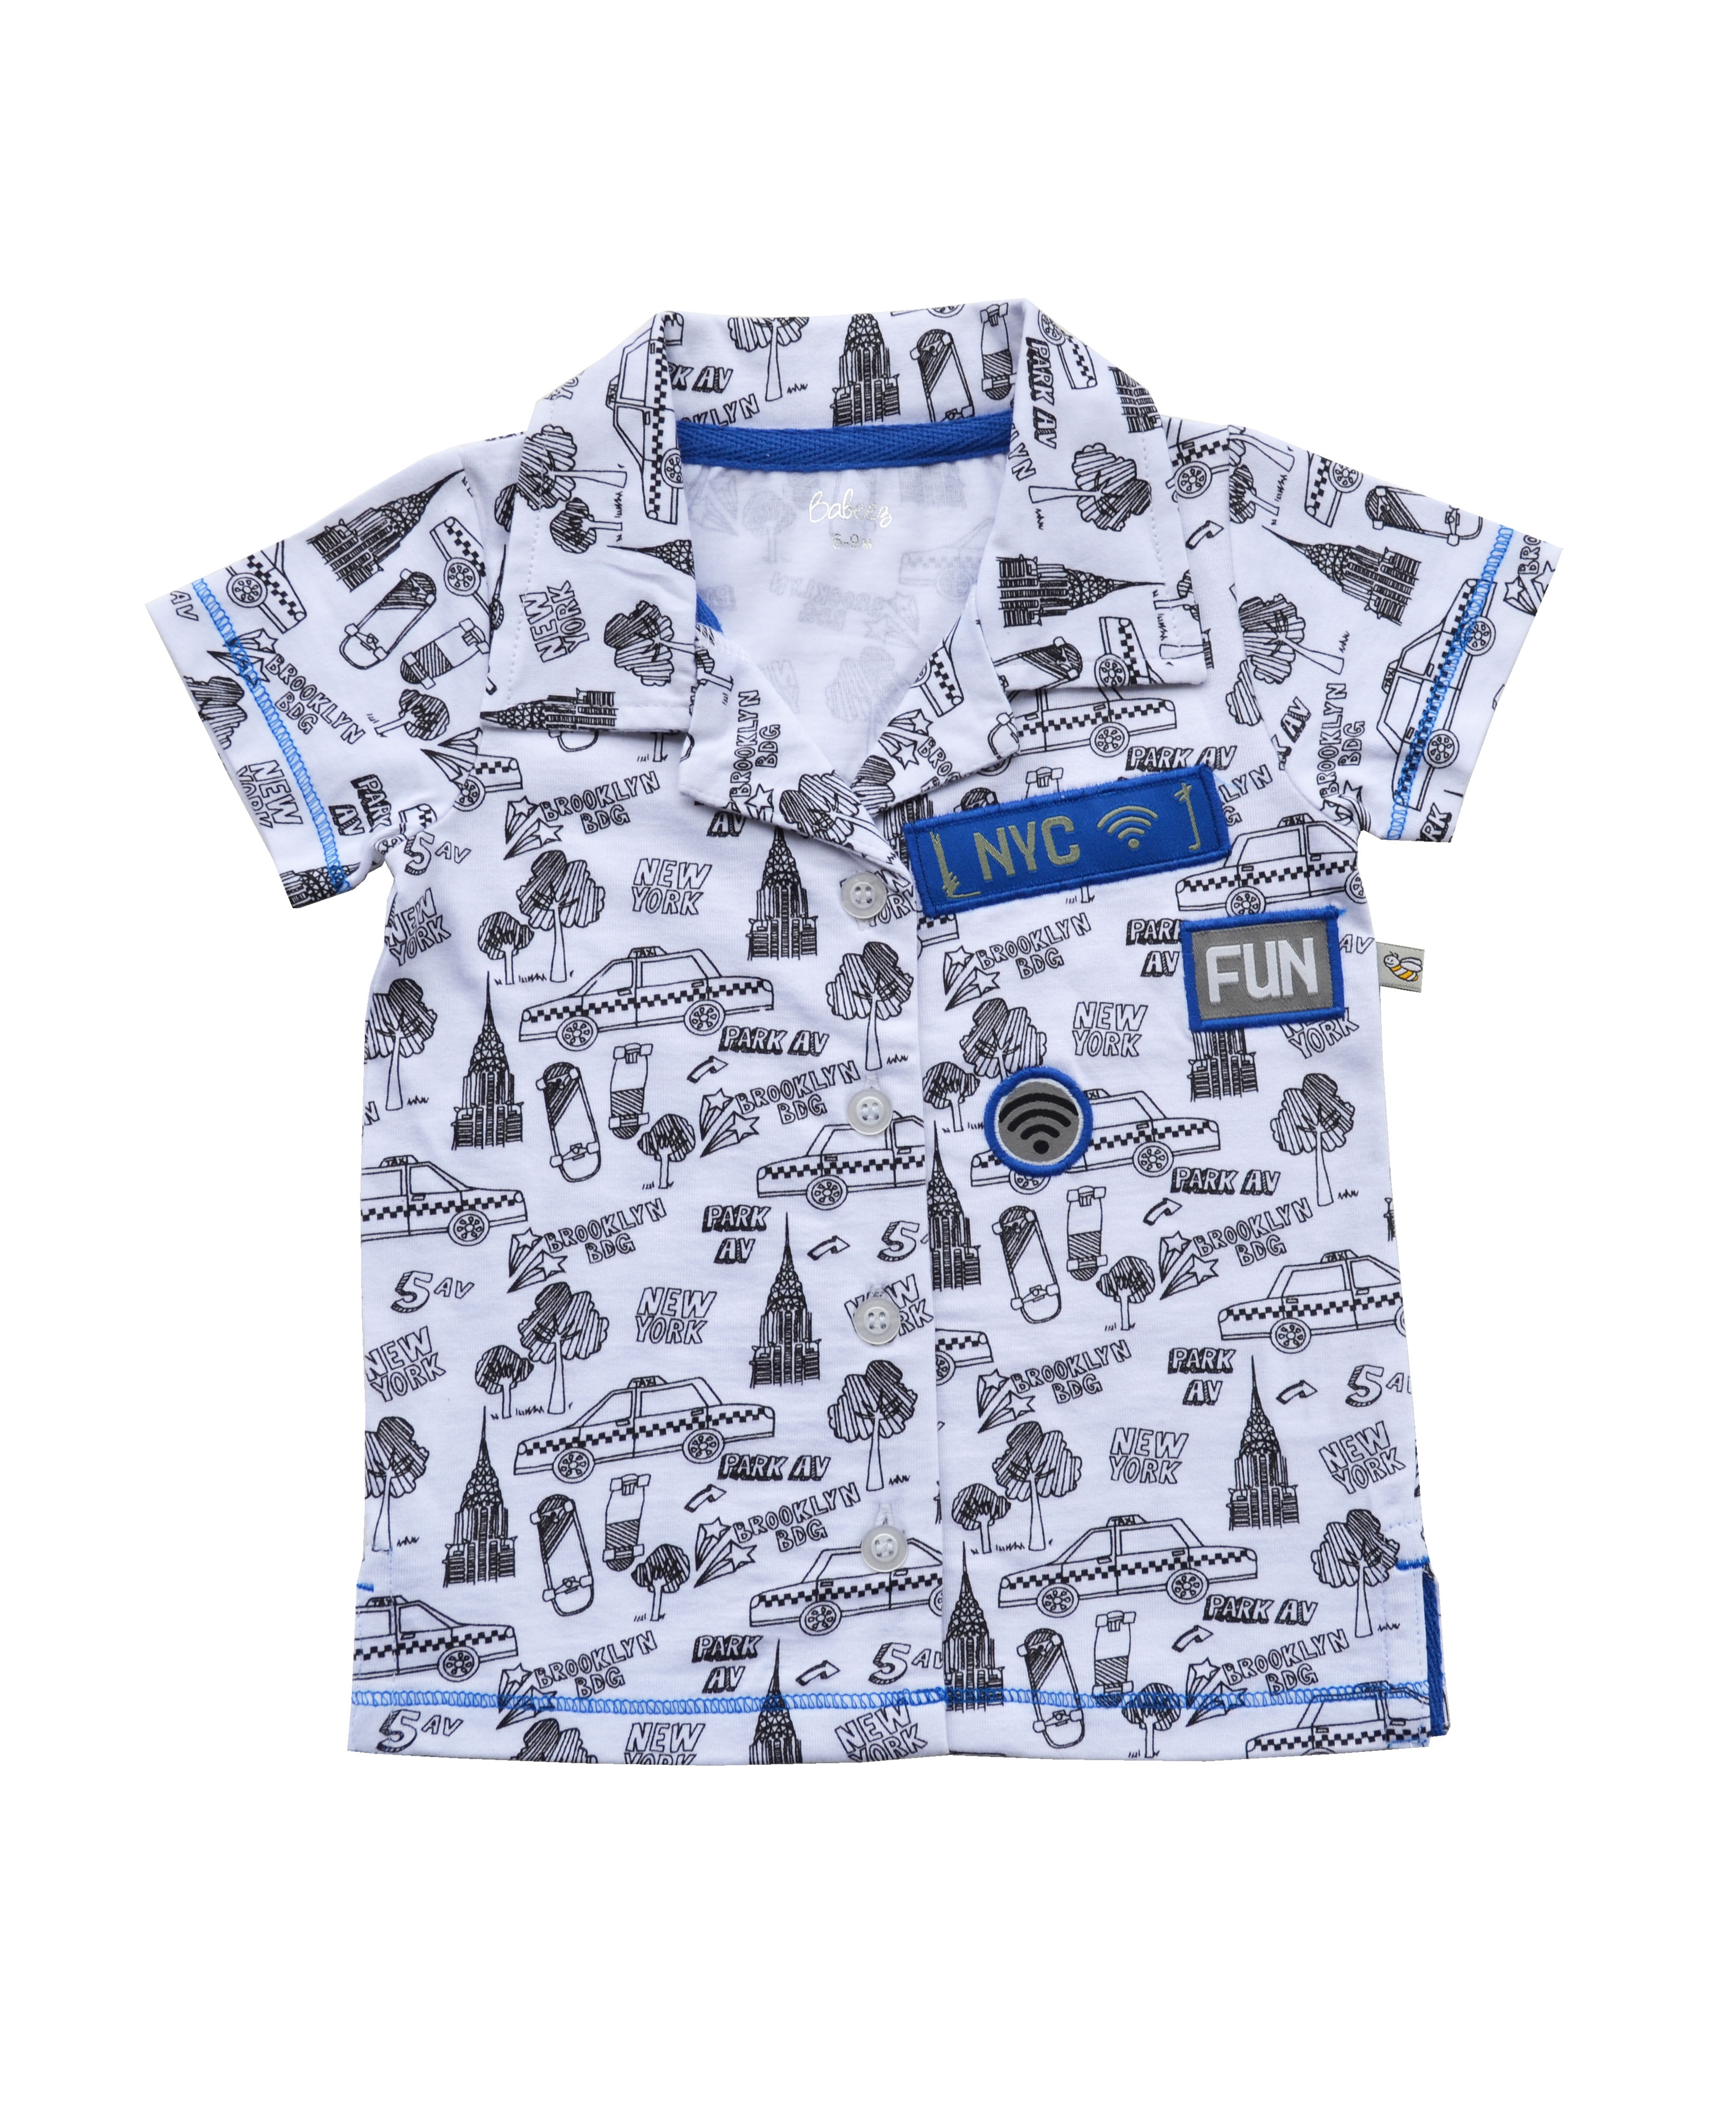 Allover New York Print on White Short Sleeves Collared Shirt (100% Cotton Single Jersey)